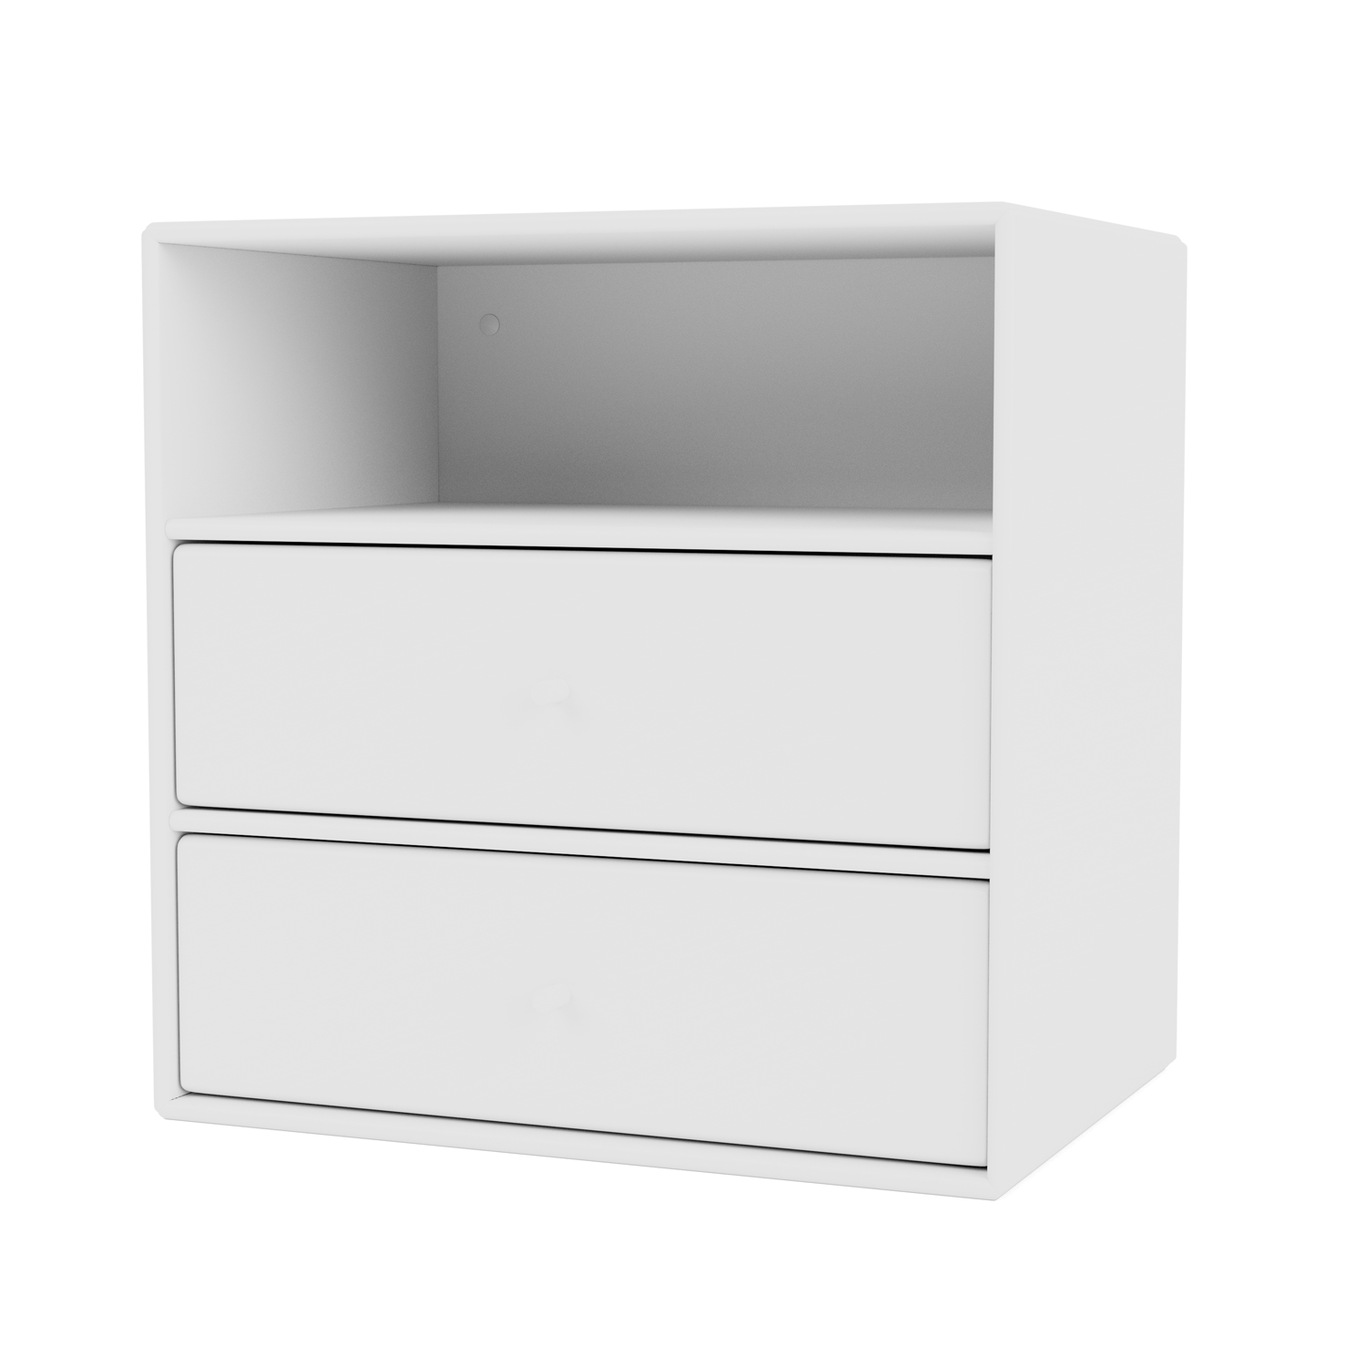 Mini 1006 Shelf With Two Drawers, New White